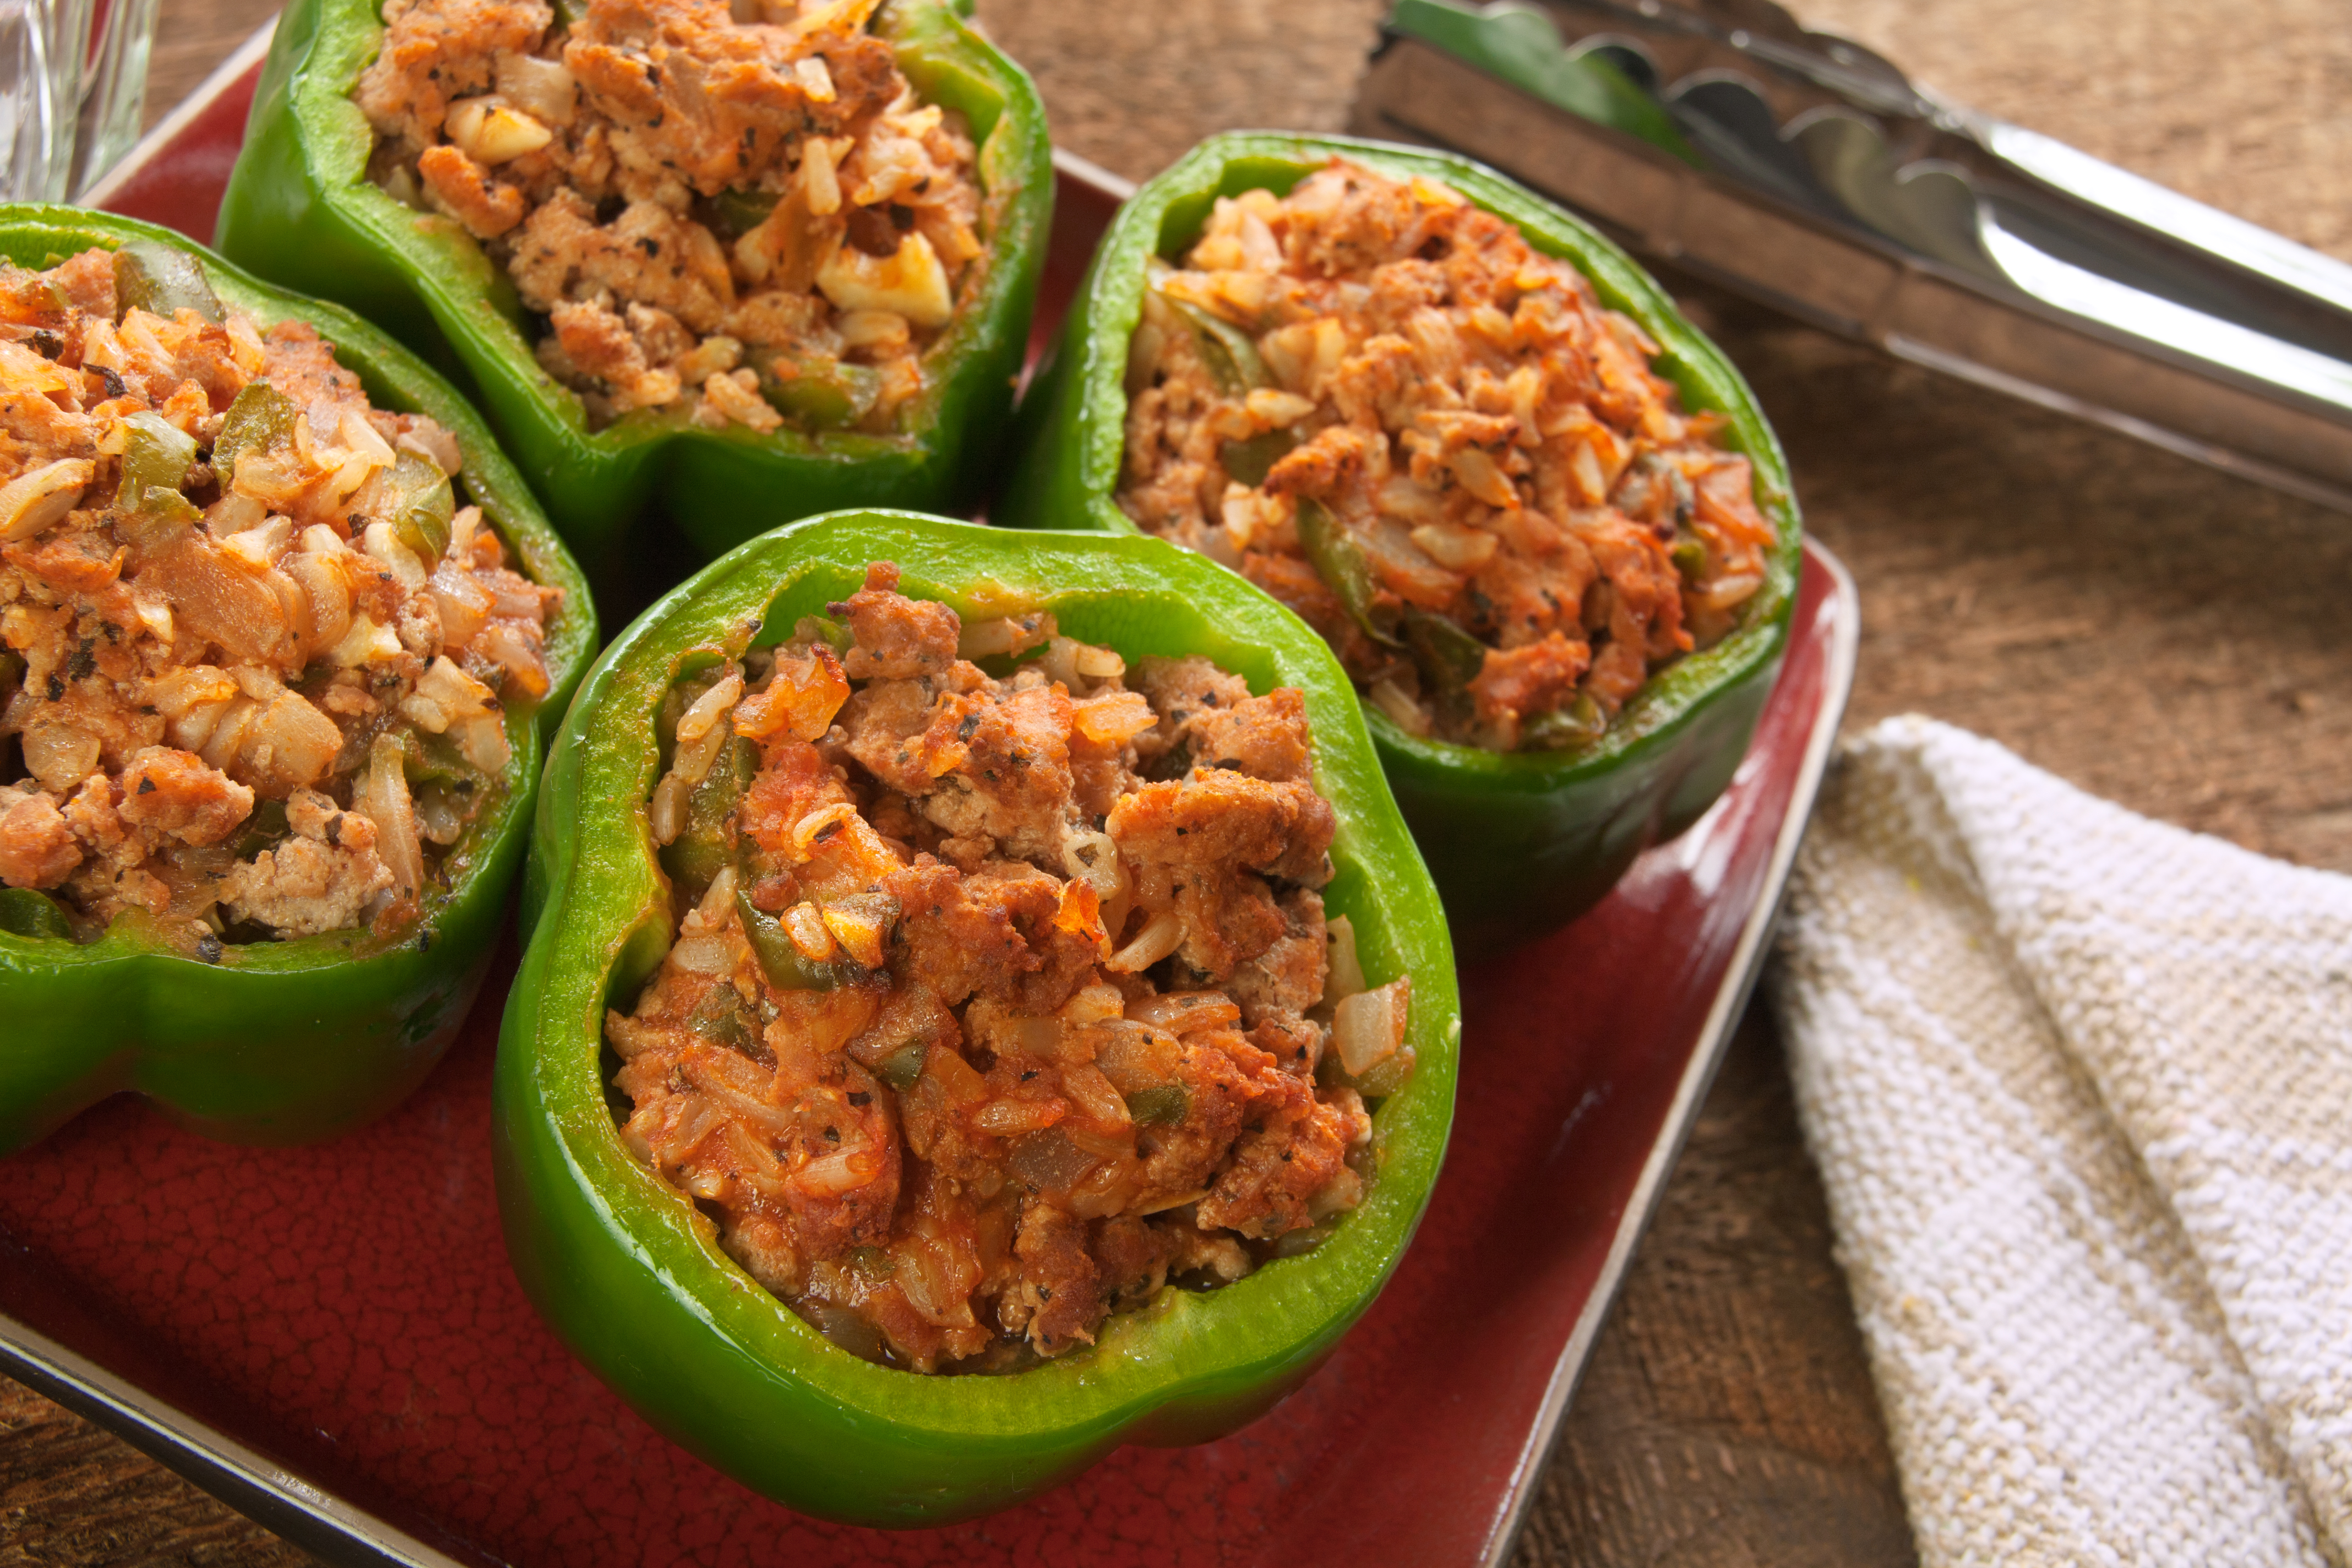 Stuffed peppers can be an awesome way to use up odd leftover proteins and whole grains.